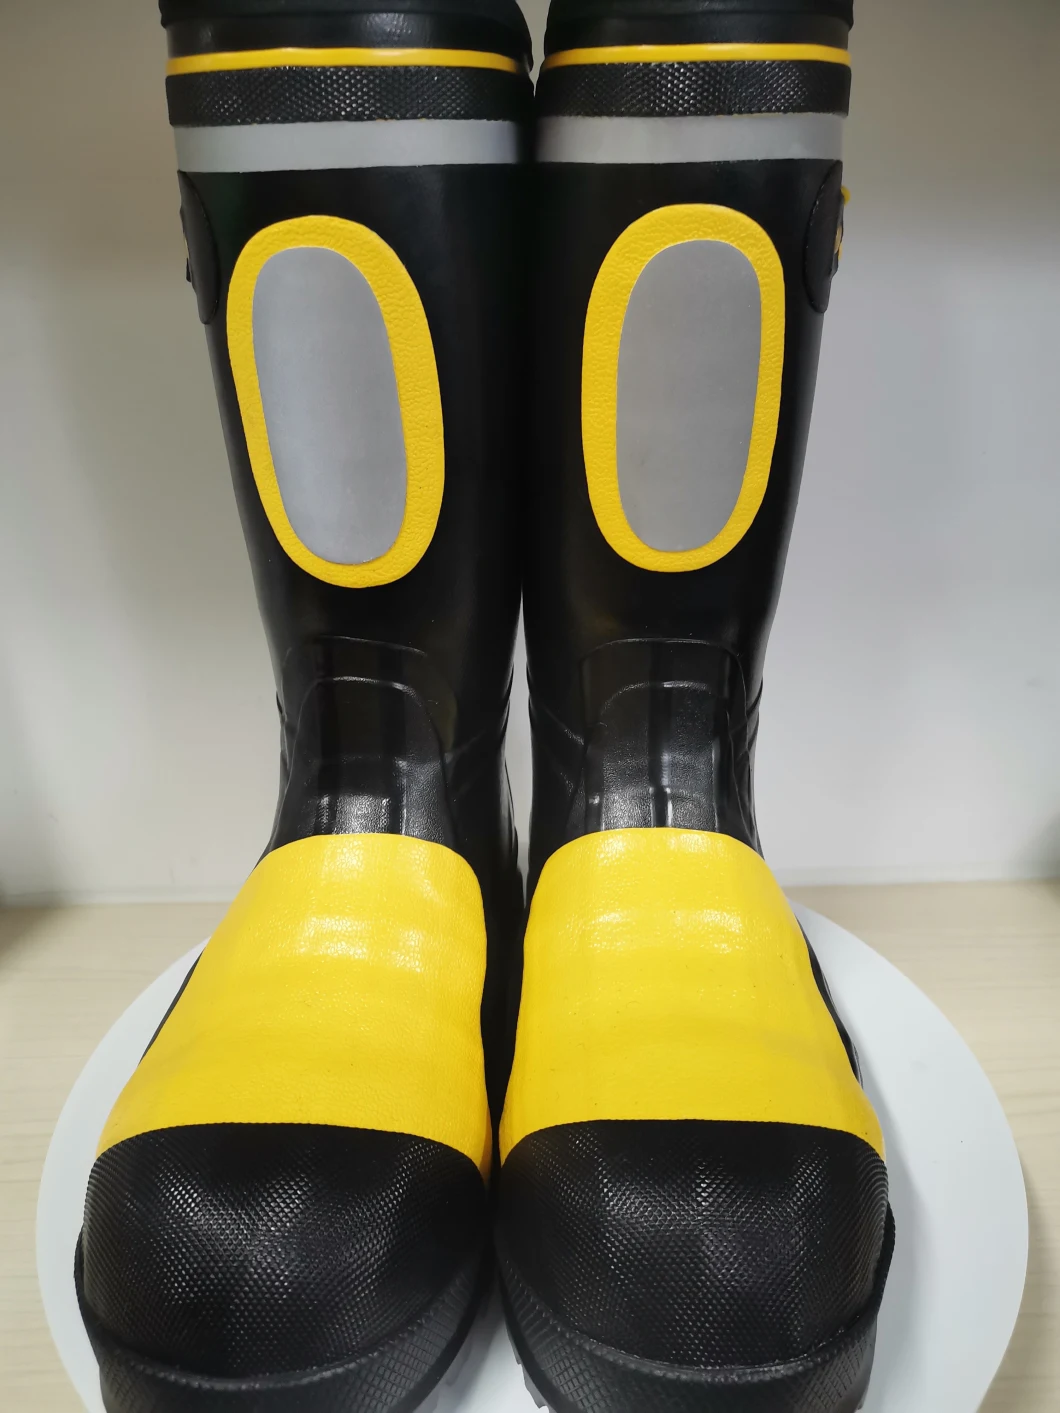 Rubber Metatarsal Protection Safety Shoes for Mining Industry and Firefighters